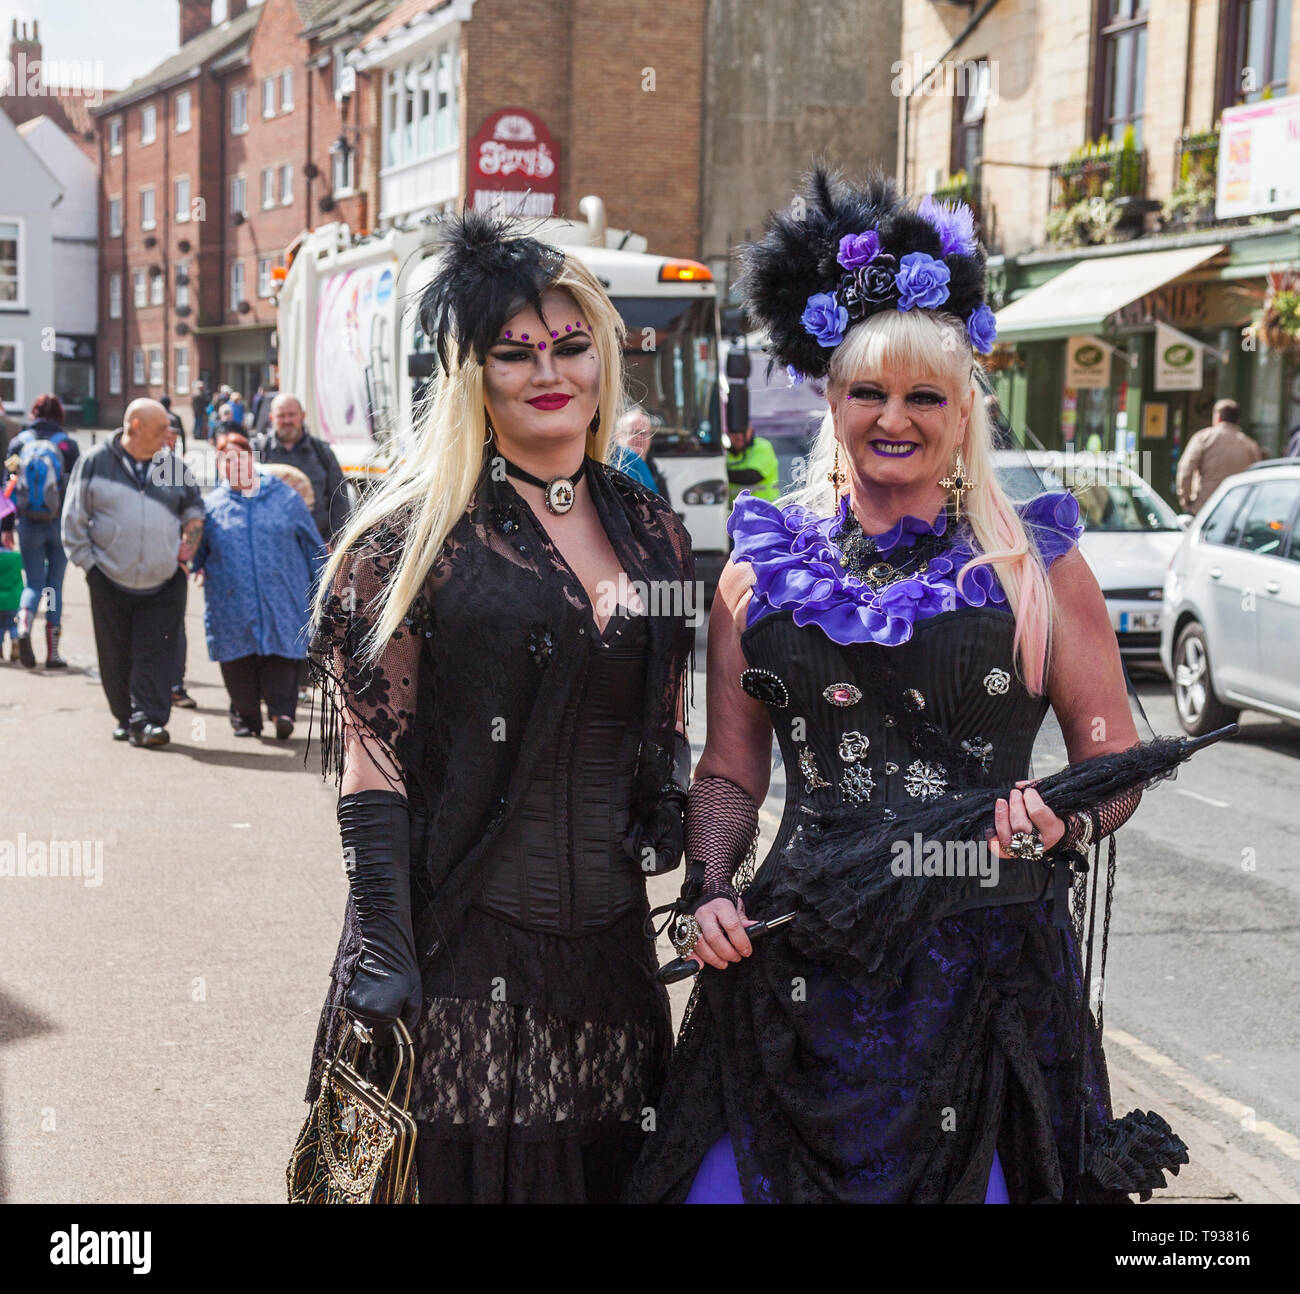 Two women dressed up as Steampunks / Goths for the Goth weekend in Whitby,North Yorkshire,England,UK Stock Photo